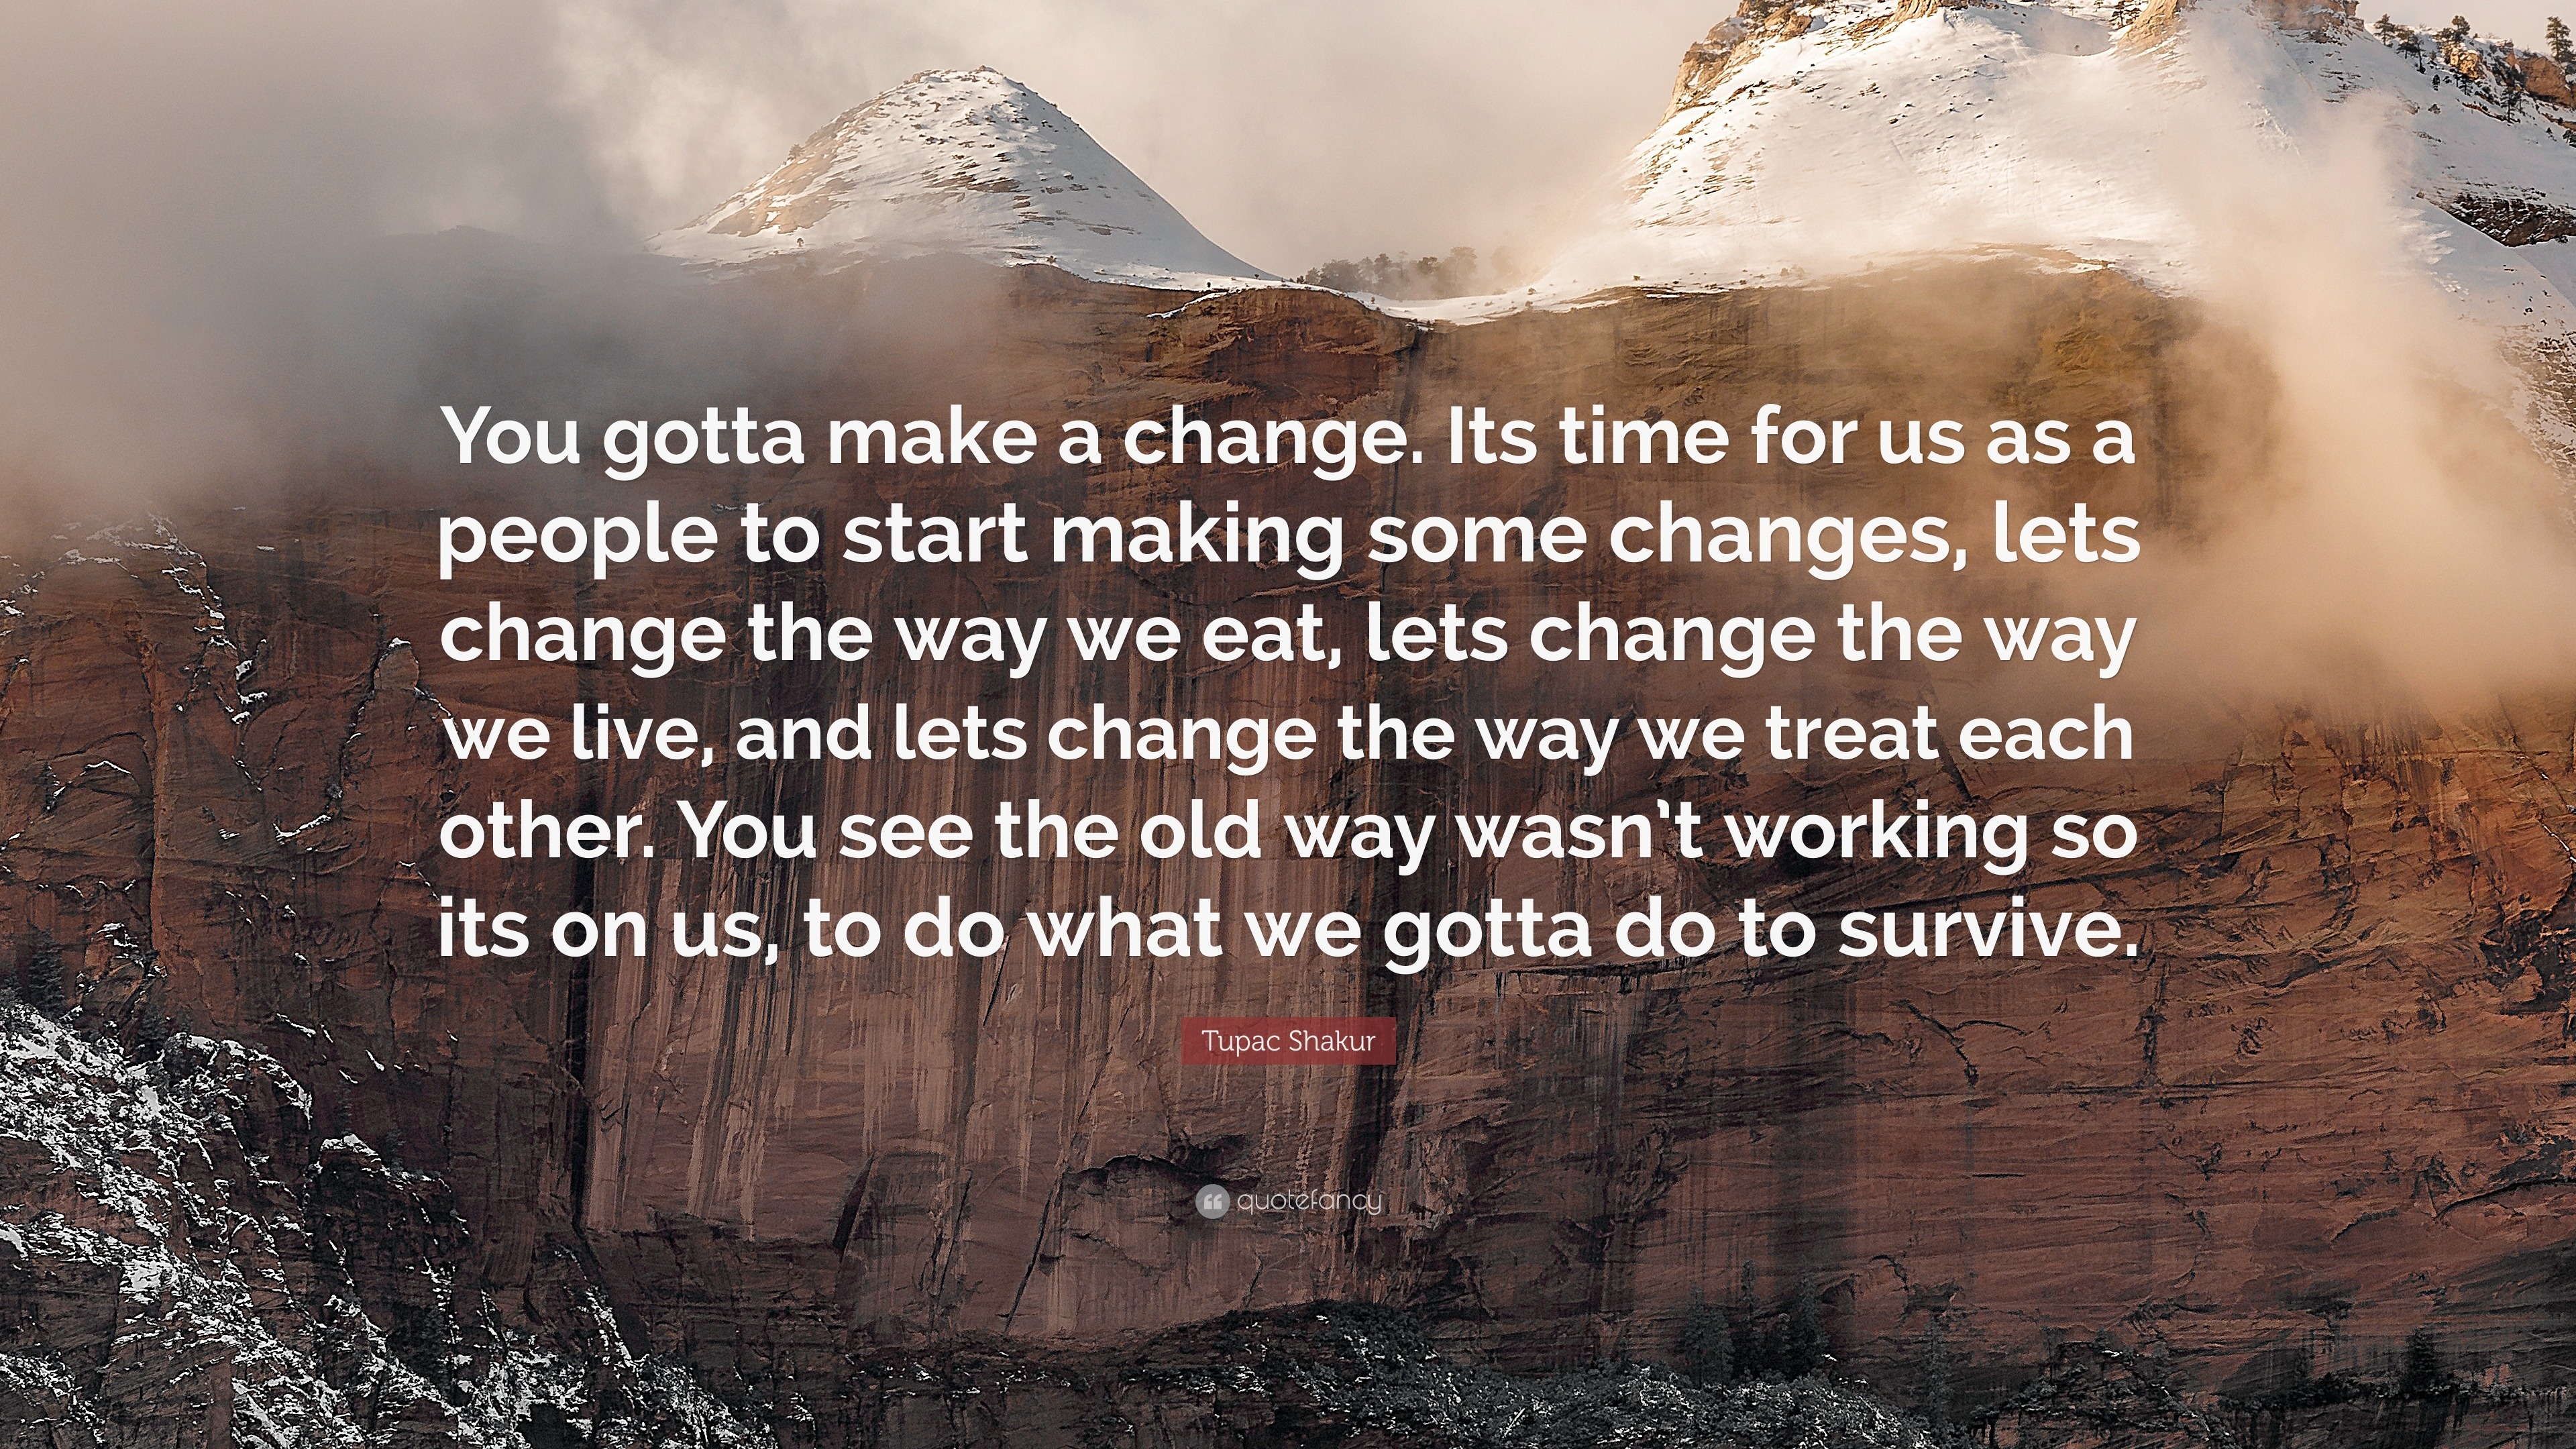 Tupac Shakur Quote “You gotta make a change Its time for us as